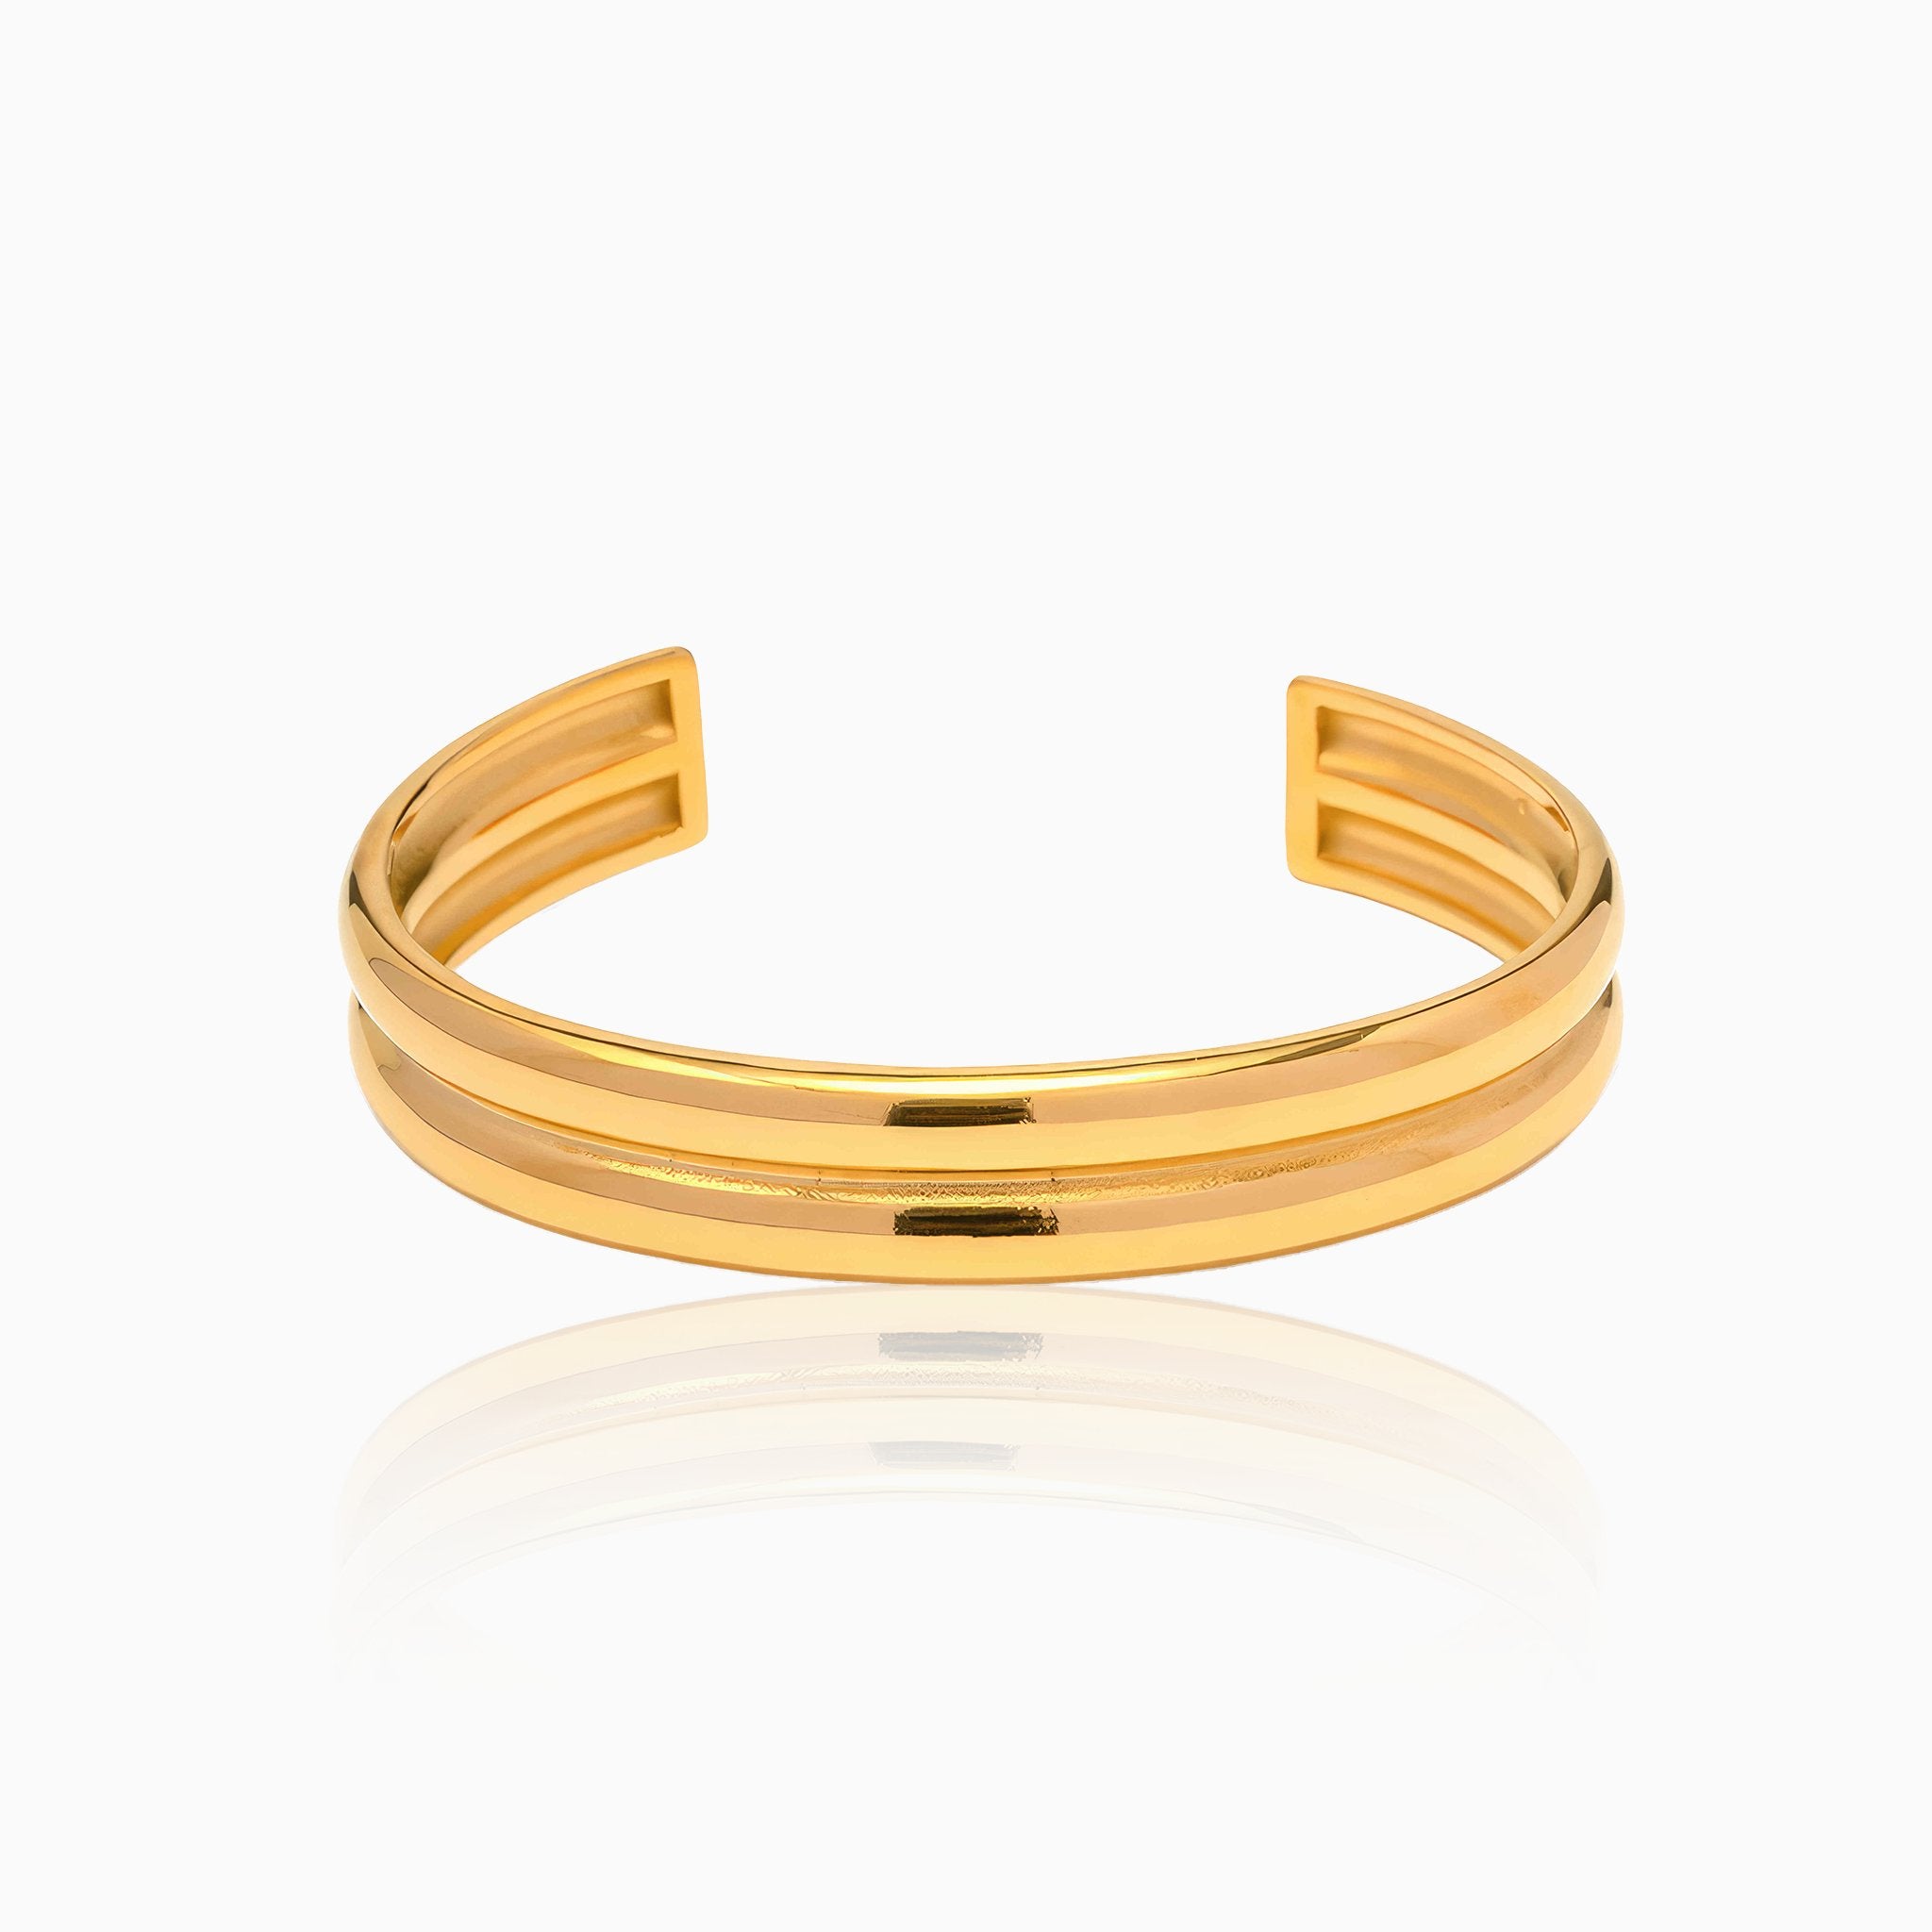 Double-Opening Versatile Bangle - Nobbier - Bangle - 18K Gold And Titanium PVD Coated Jewelry